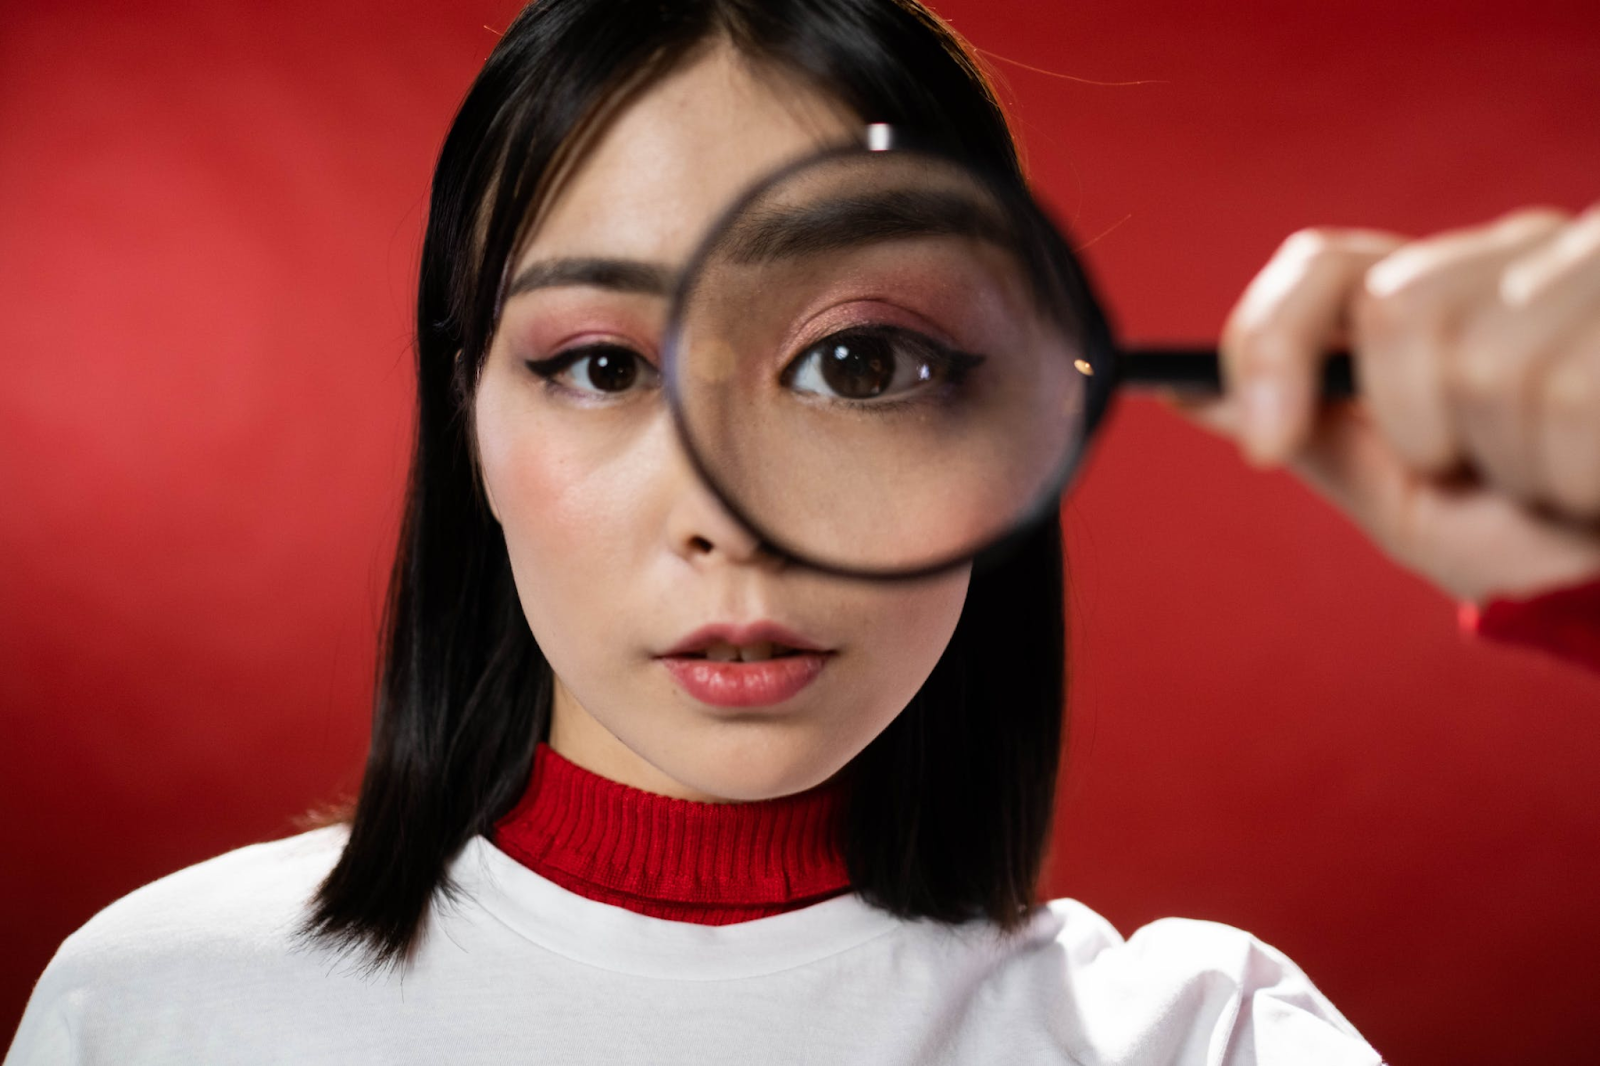 A girl wearing a white and red outfit holding a magnifying glass in front of her face